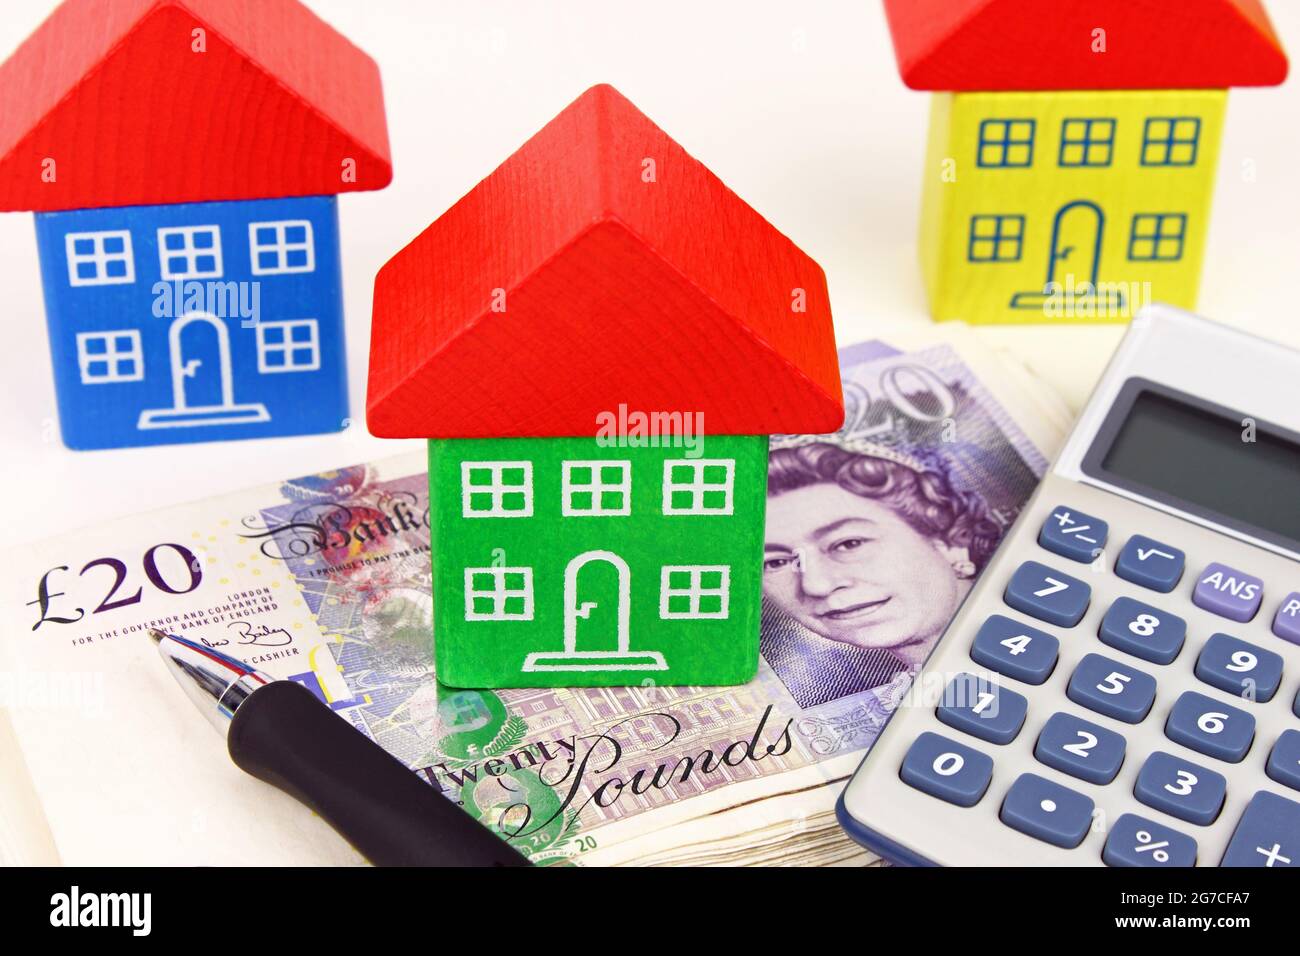 A house sitting on a pile of money, with a pen and calculator to symbolize house finance in the UK. Stock Photo